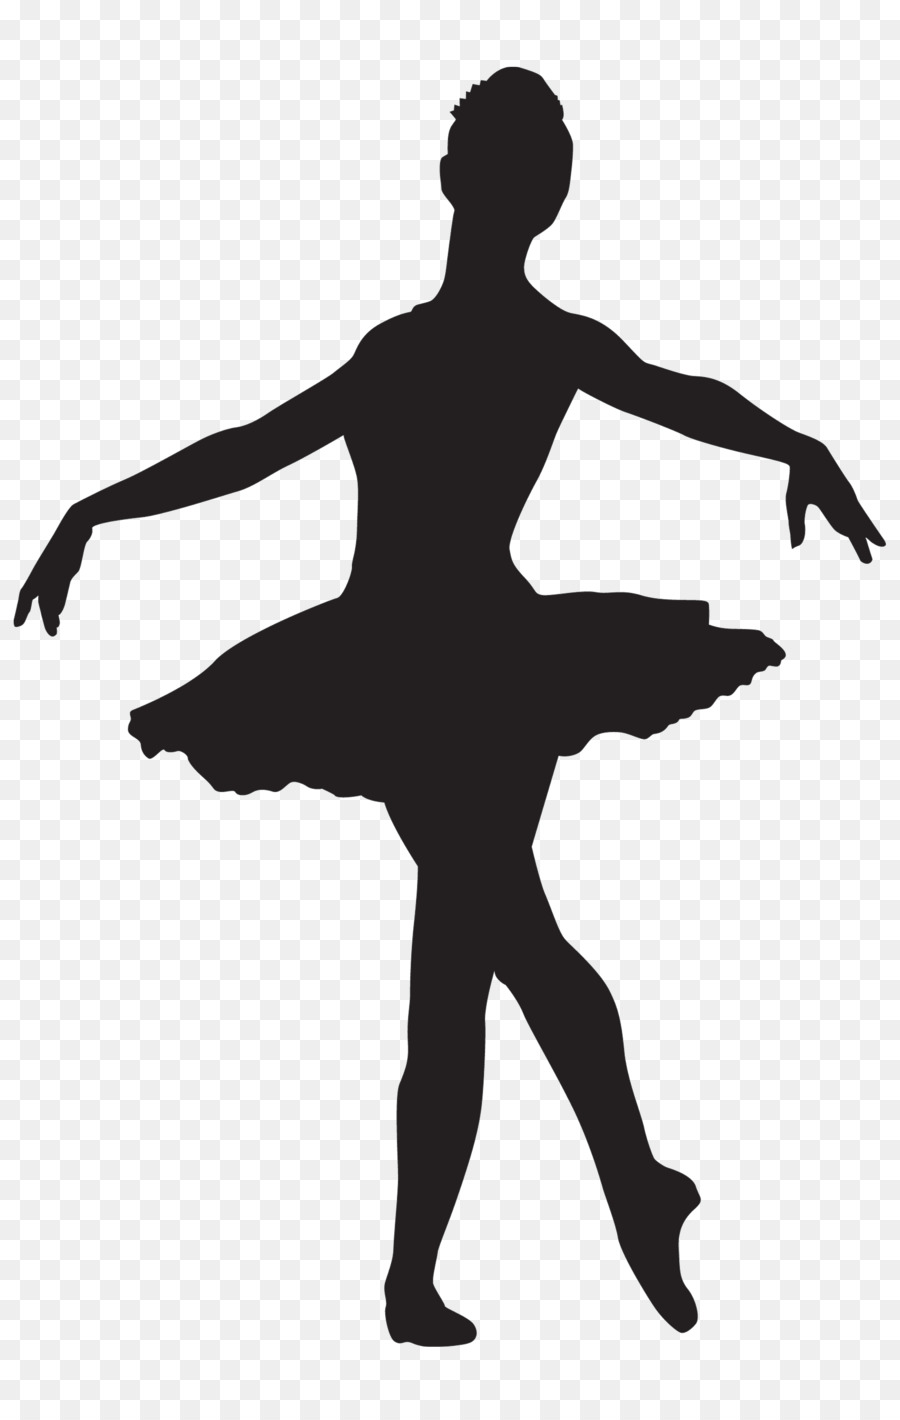 Ballet Dancer Silhouette - Silhouette png download - 2100*3300 - Free Transparent Ballet Dancer png Download.